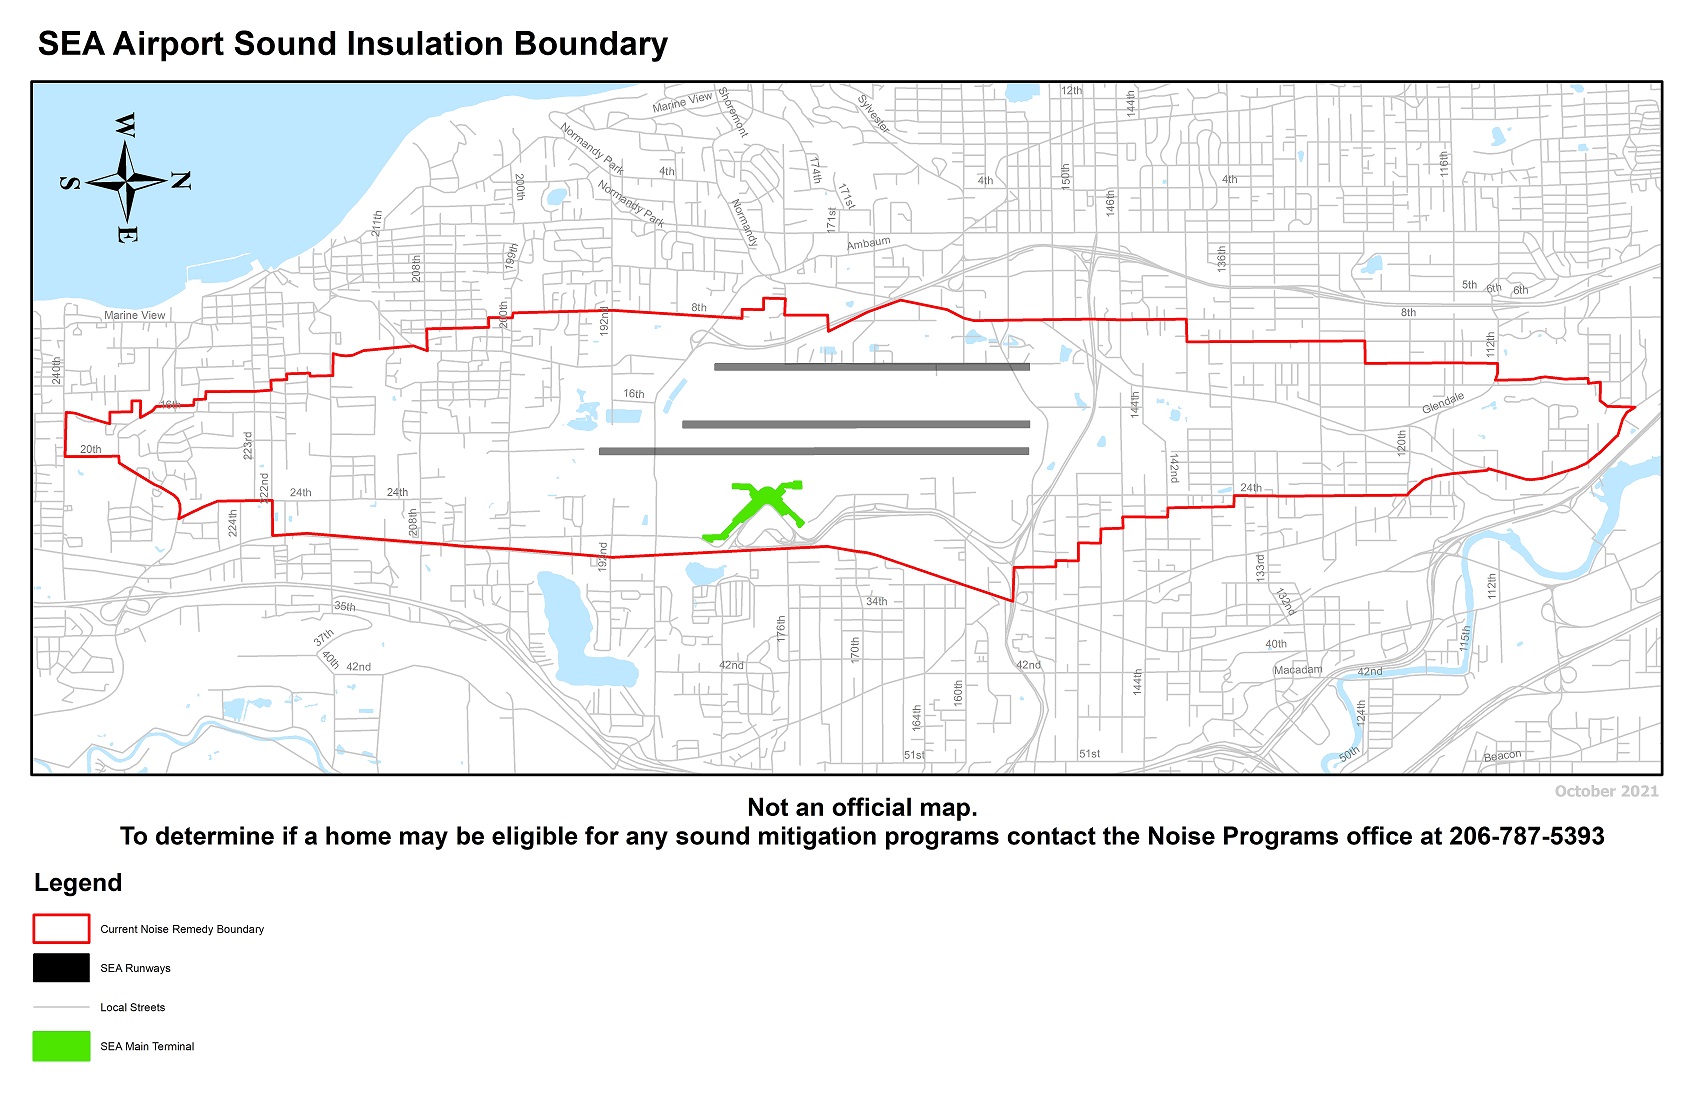 sound mitigation sample map, not an official map. Contact the Noise Programs office for eligibility details